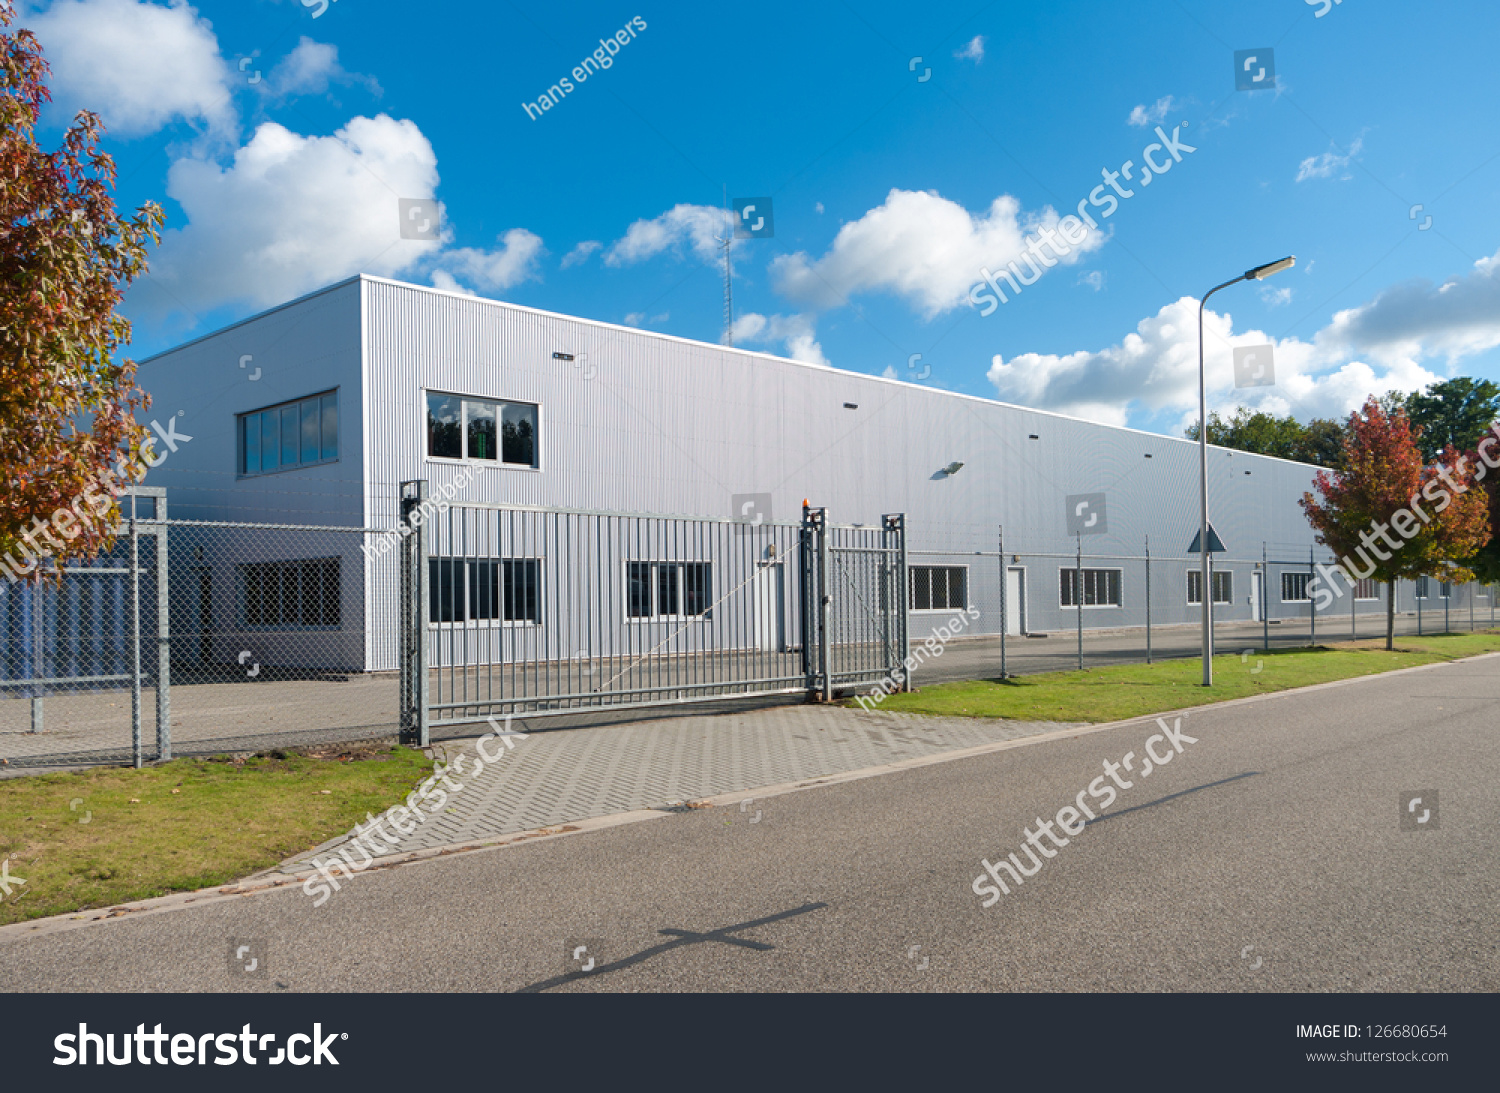 modern exterior of an industrial building, surrounded by a fence with iron gate #126680654